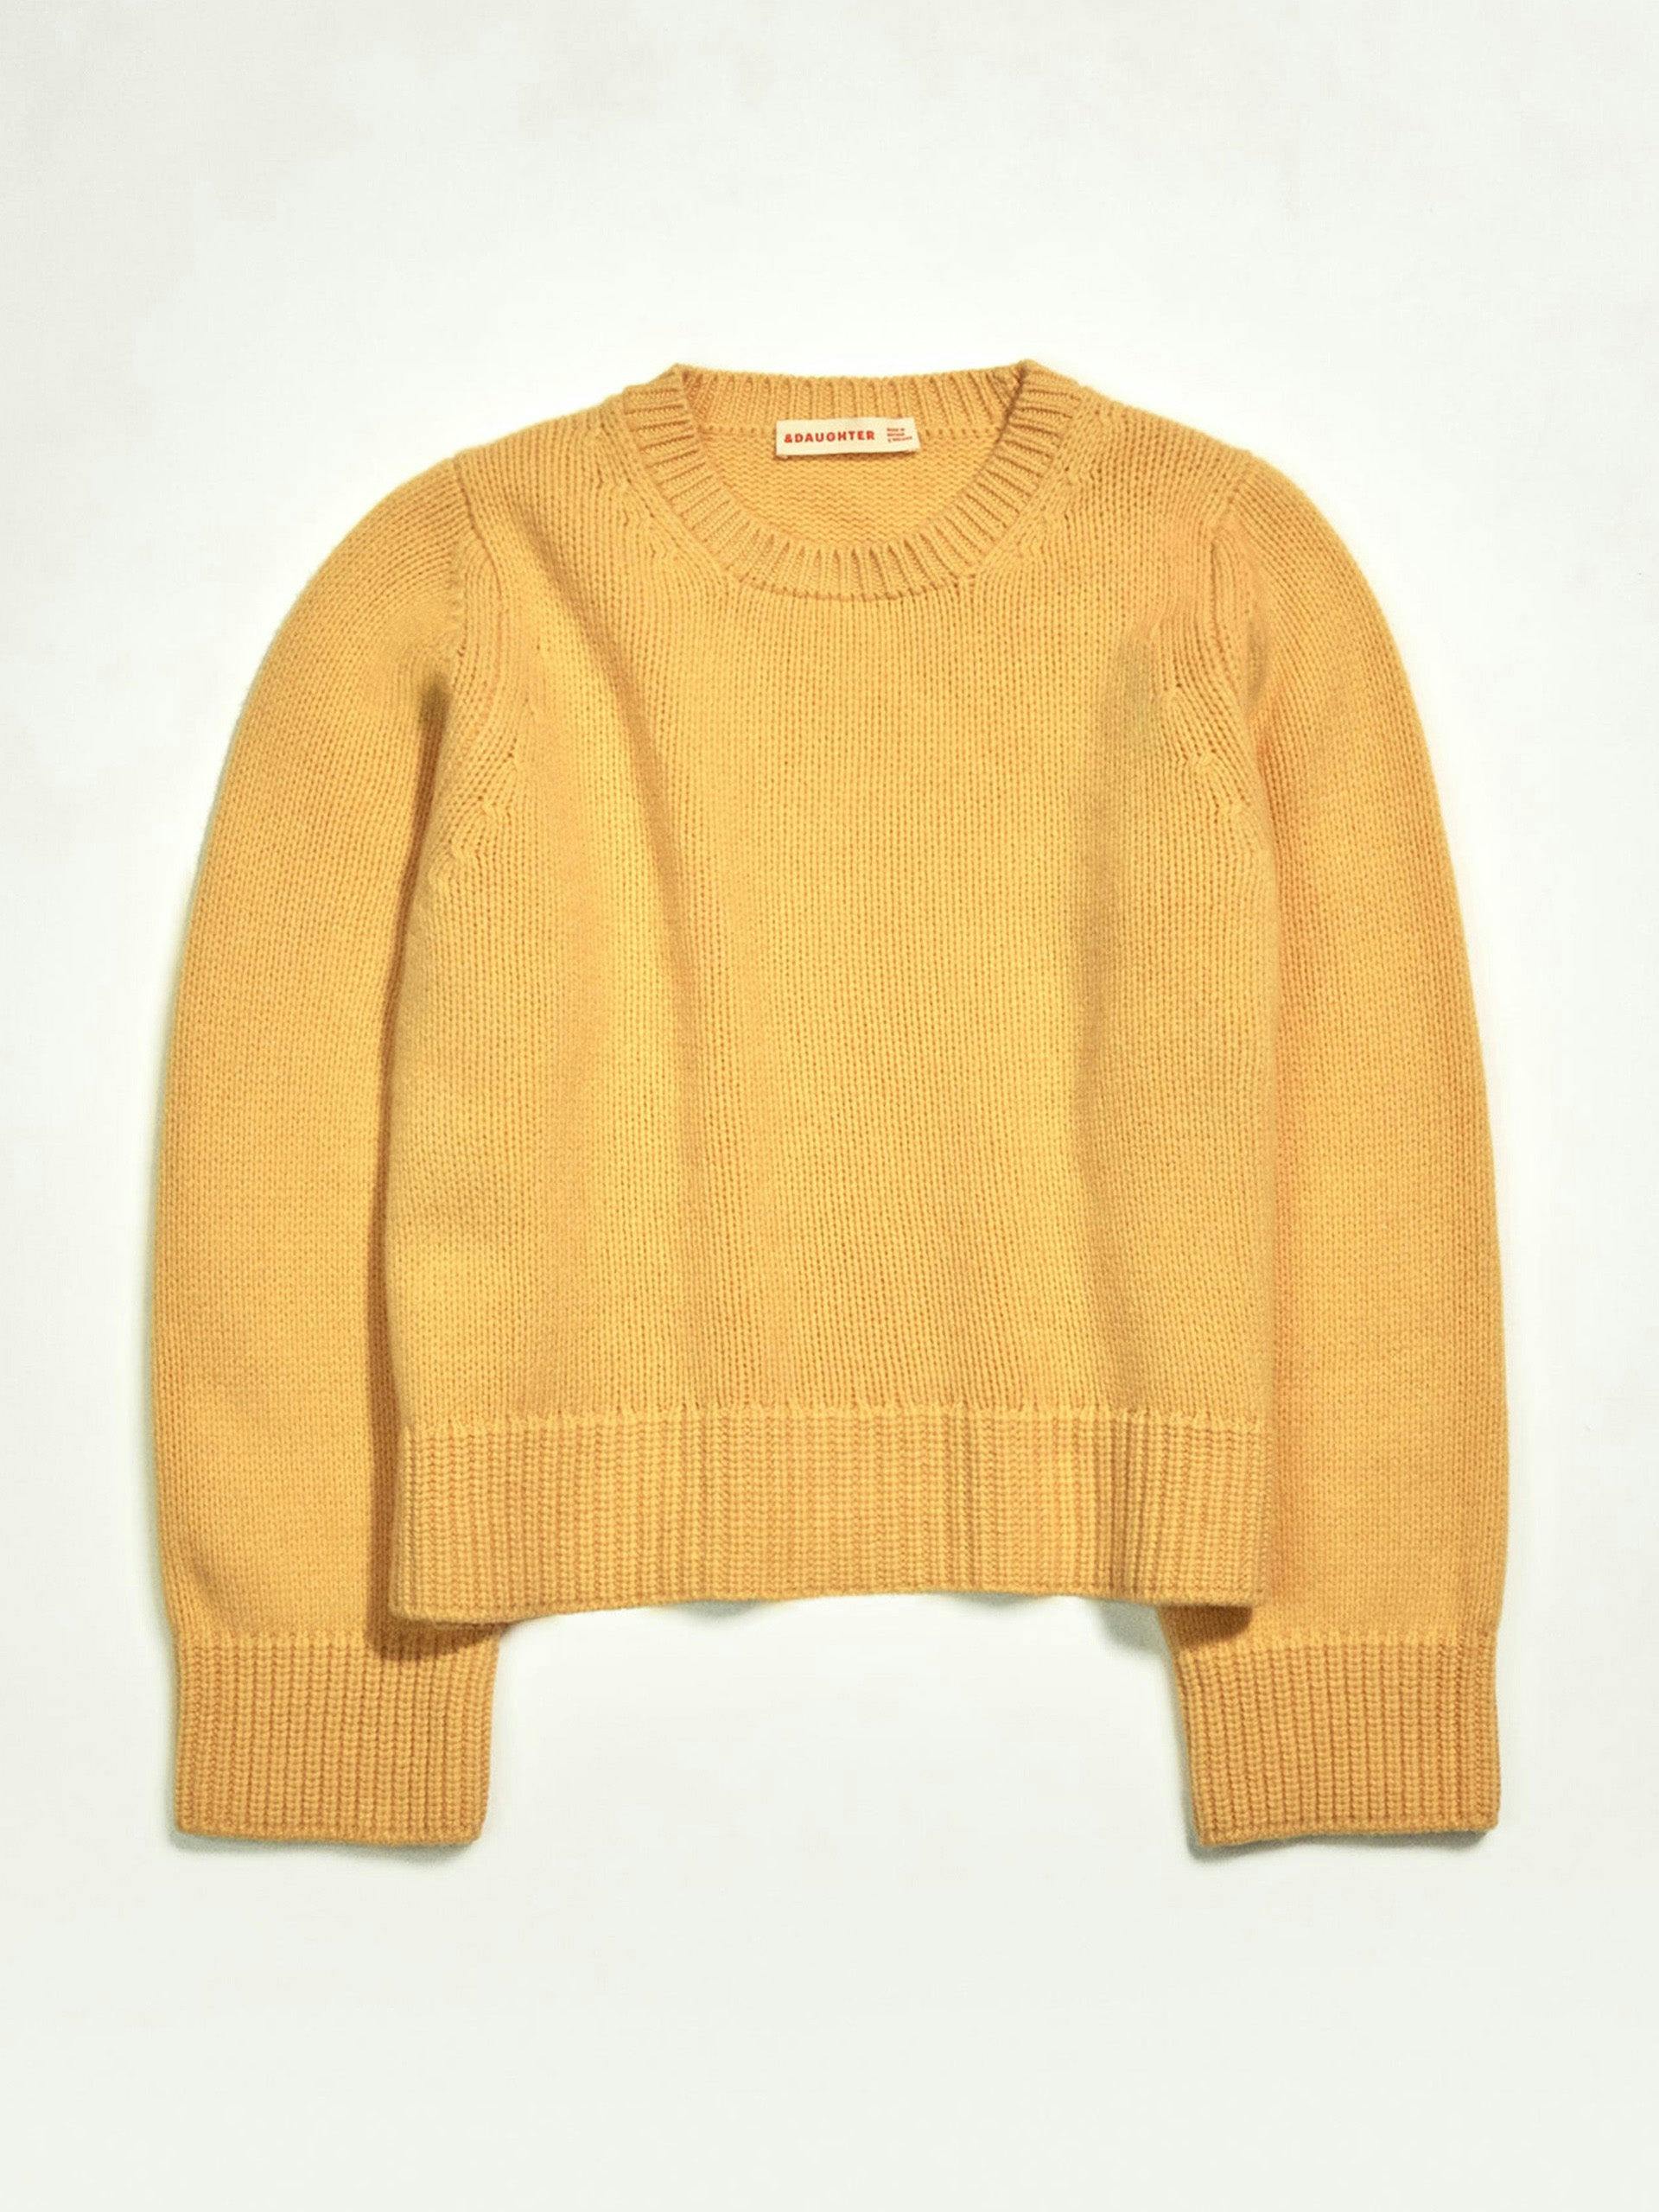 Slouch wool/cashmere crewneck in yellow